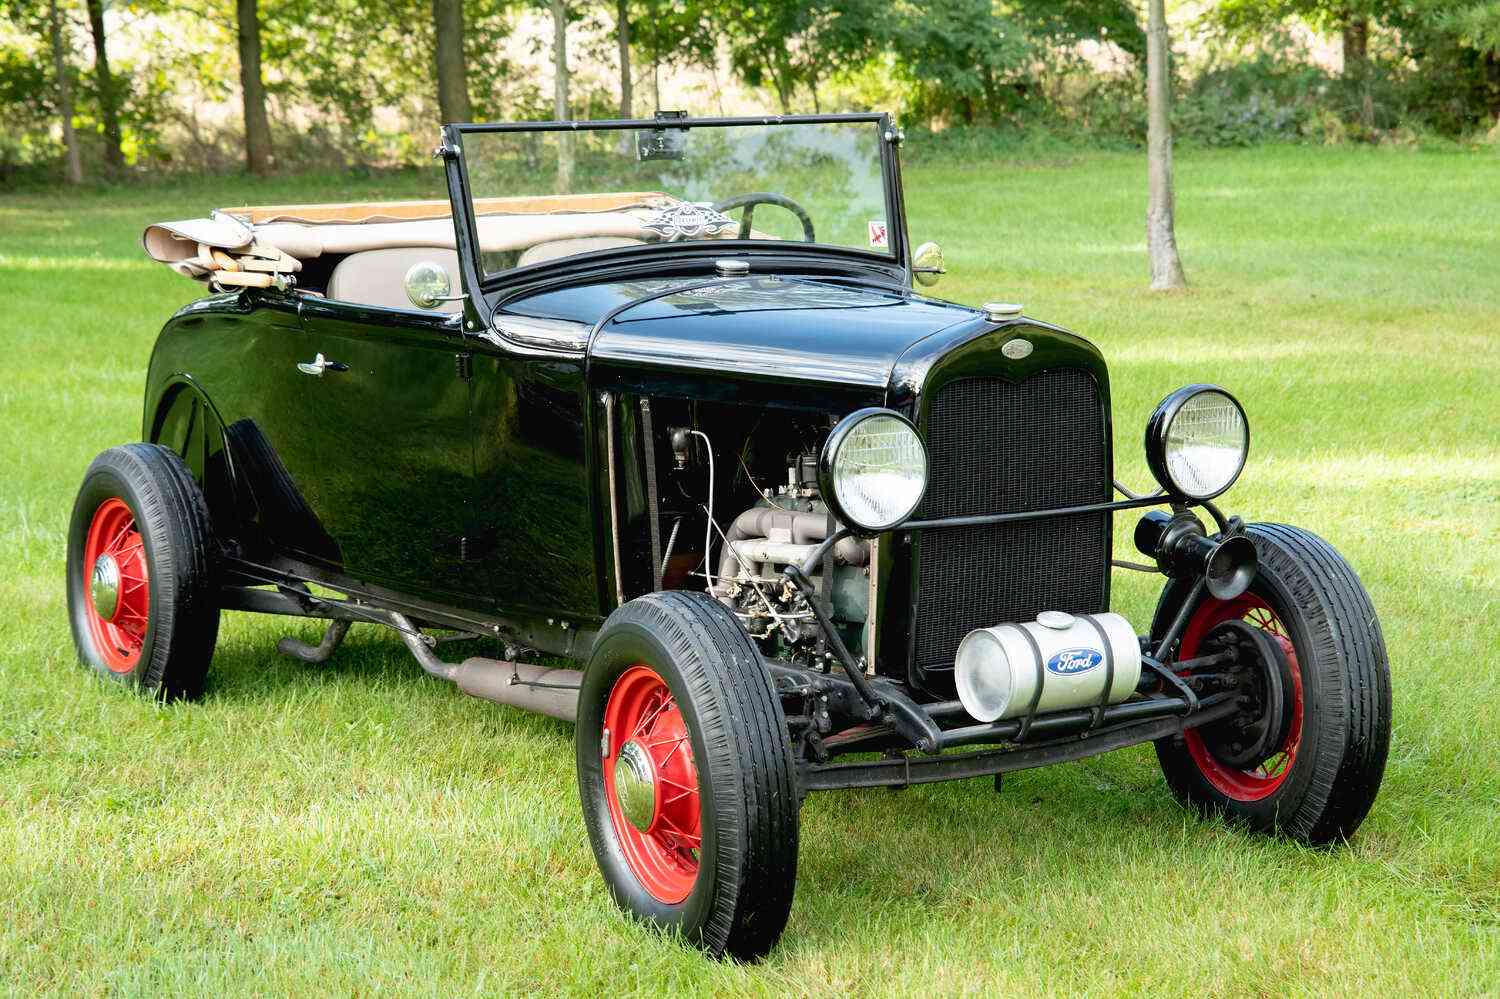 Historic cars, from Model A to Mustang